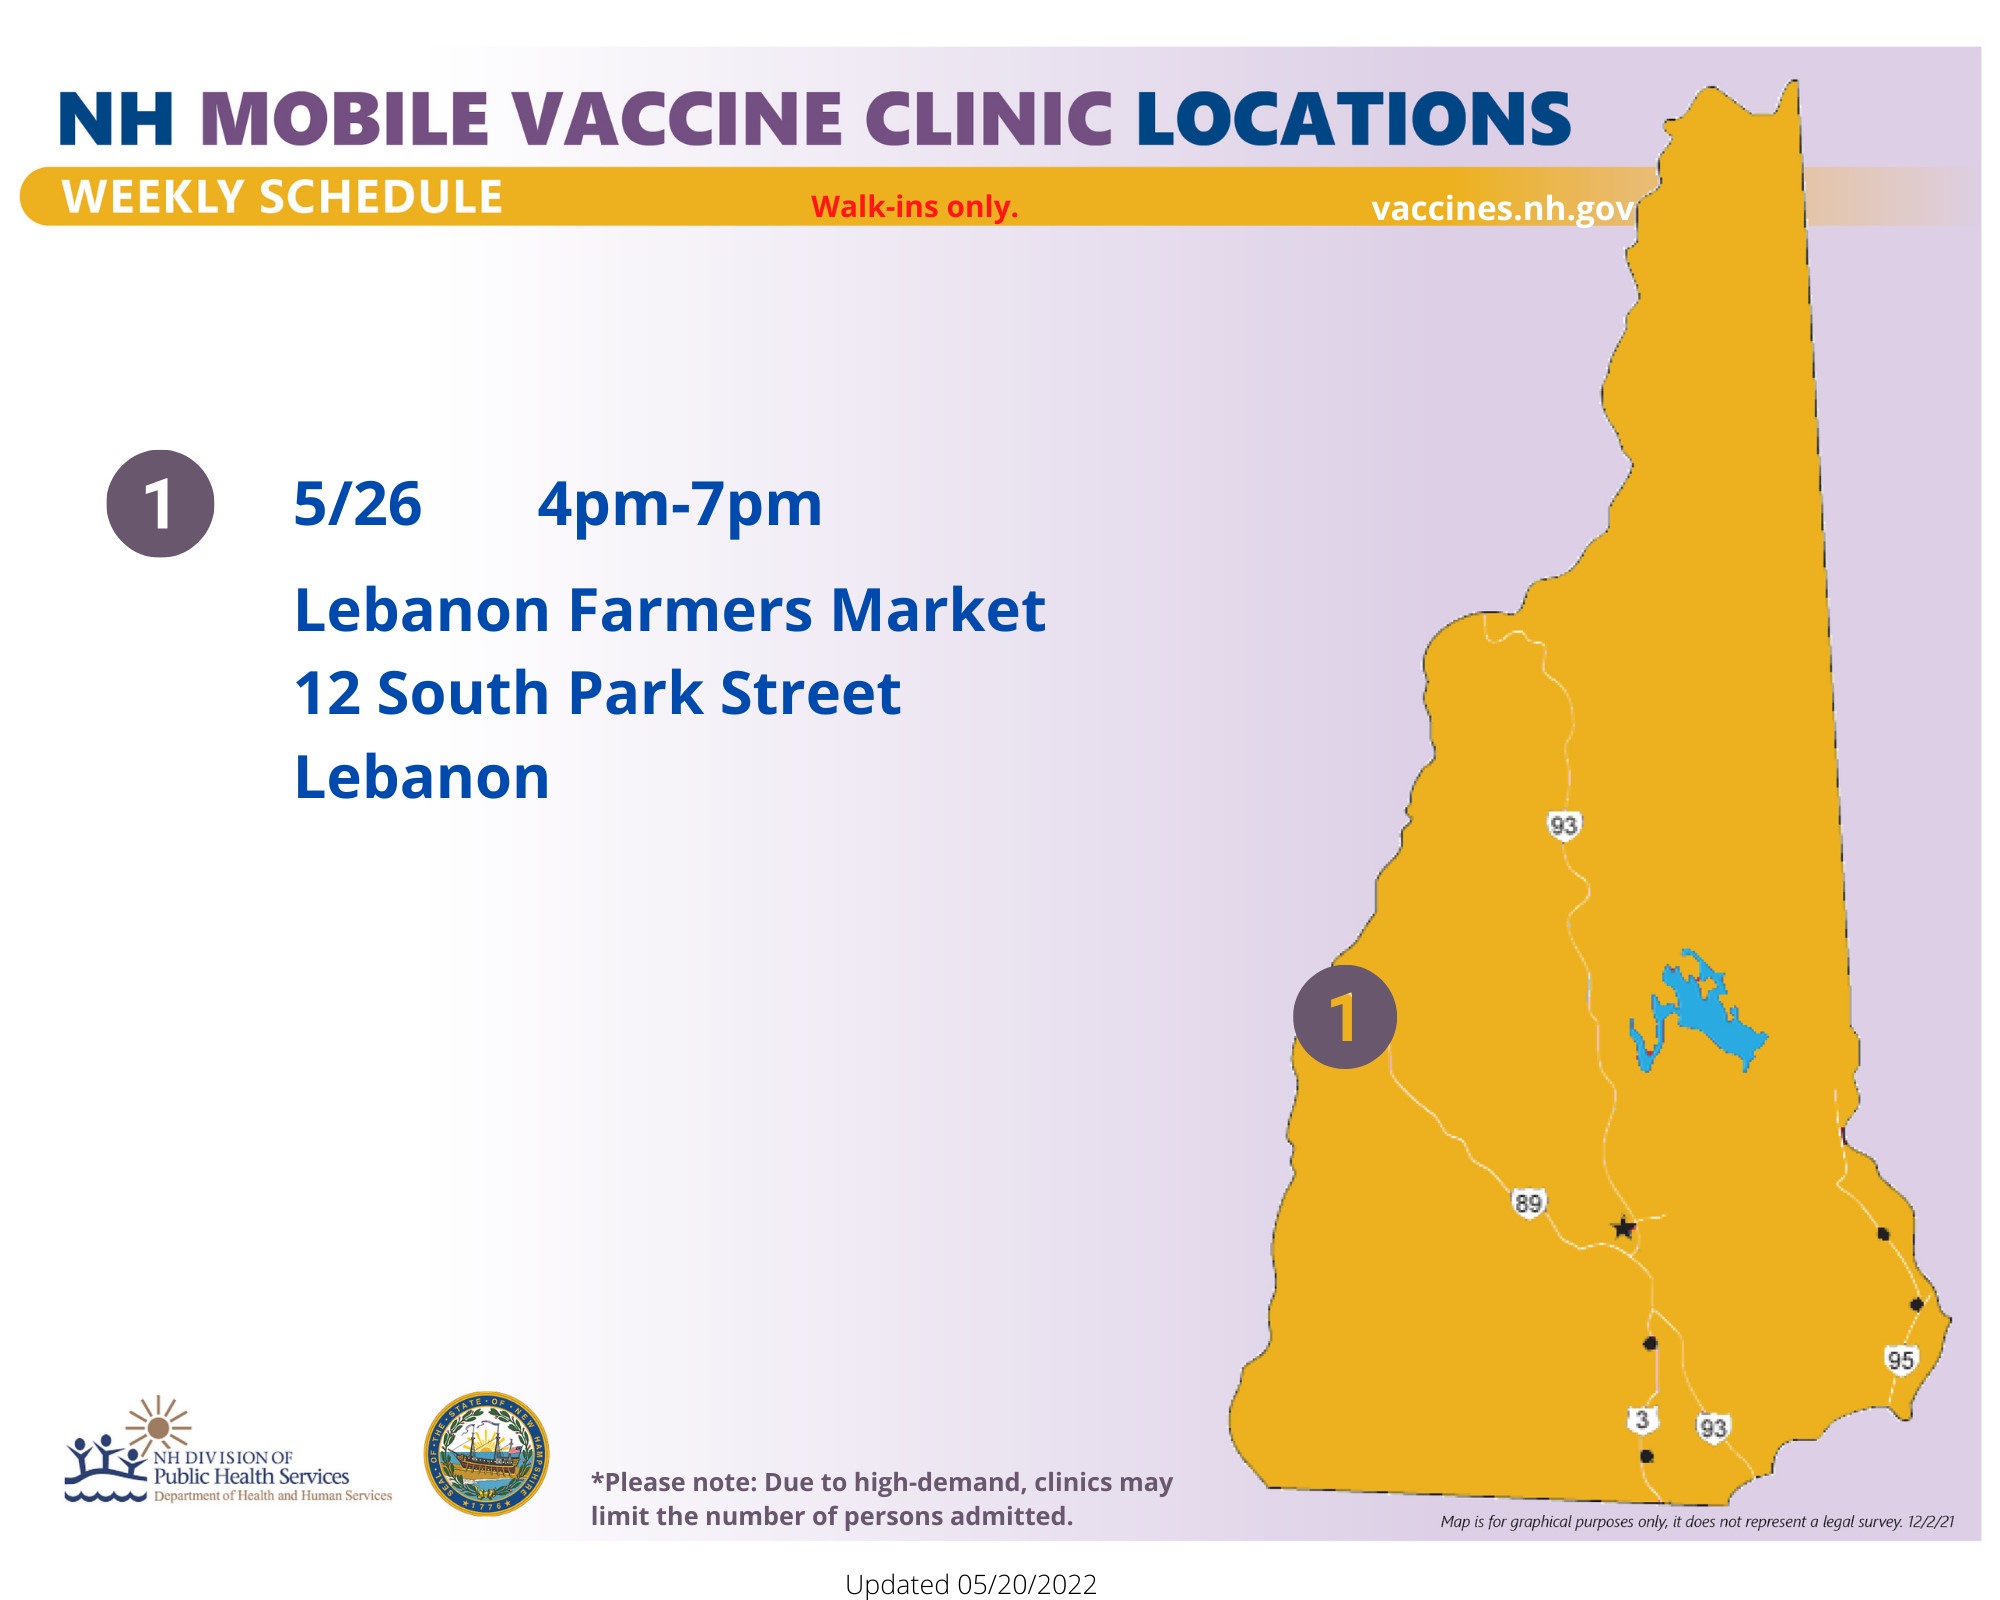 Mobile Vaccine Clinic Locations map